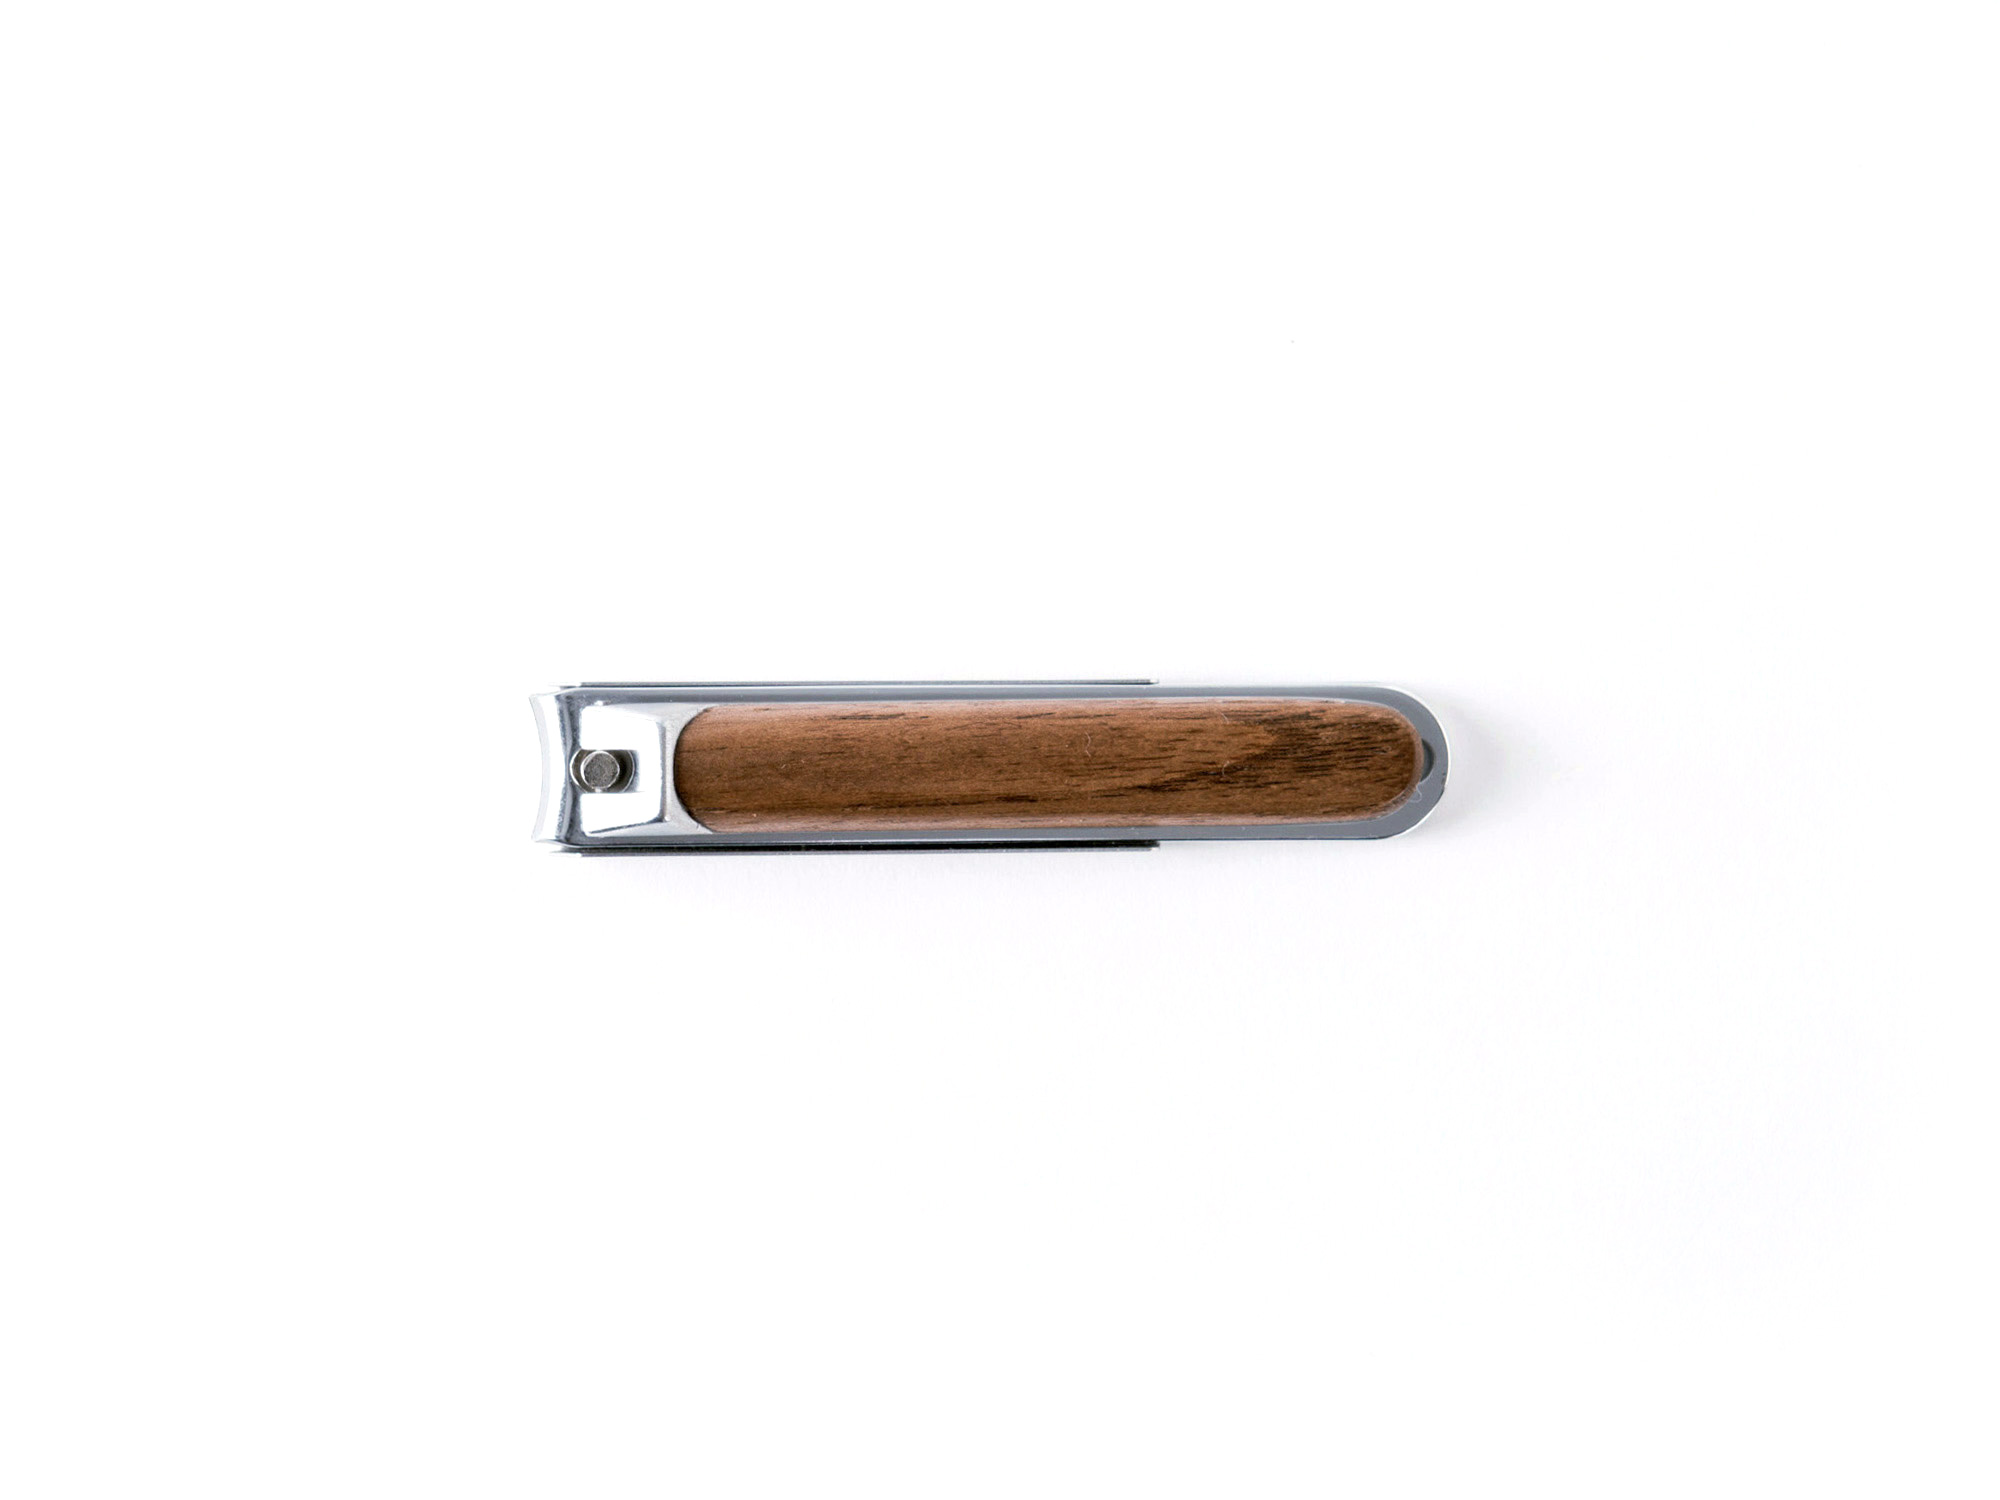 Established 1959<br />
These keen-edged nail clippers are made by craftsmen carrying on the skills of traditional swordsmiths